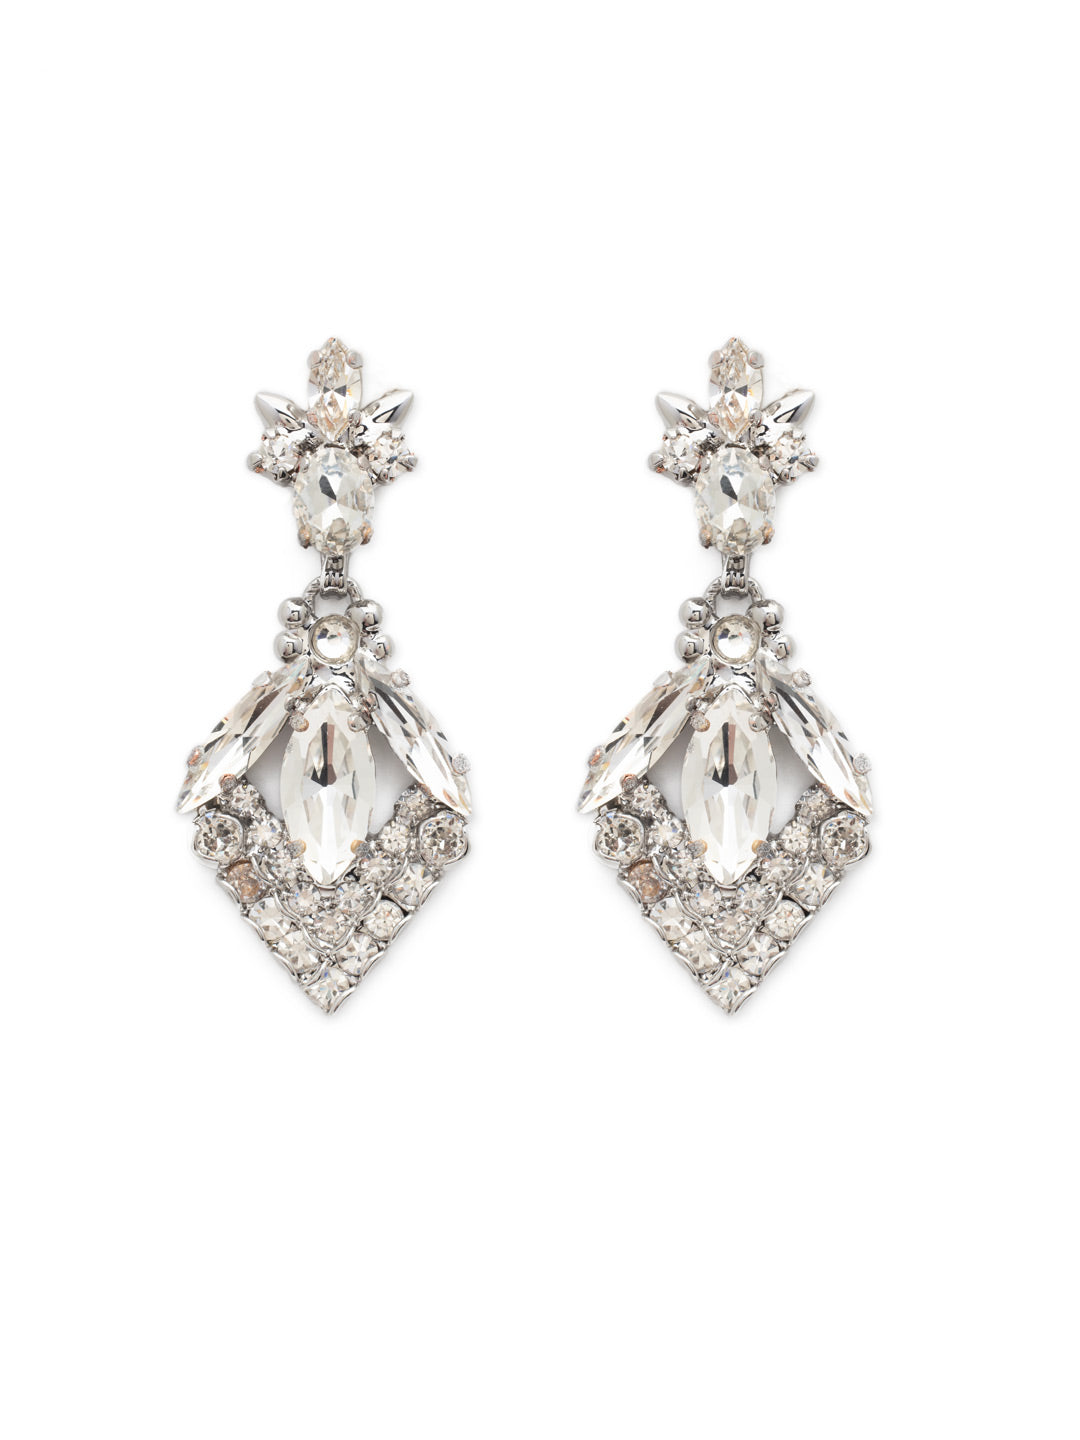 Baroque Statement Earring - EDG2PDCRY - <p>The intricate design on these statement-making earrings is sure to turn heads! A variety of crystal shapes surround one central navette crystal. From Sorrelli's Crystal collection in our Palladium finish.</p>